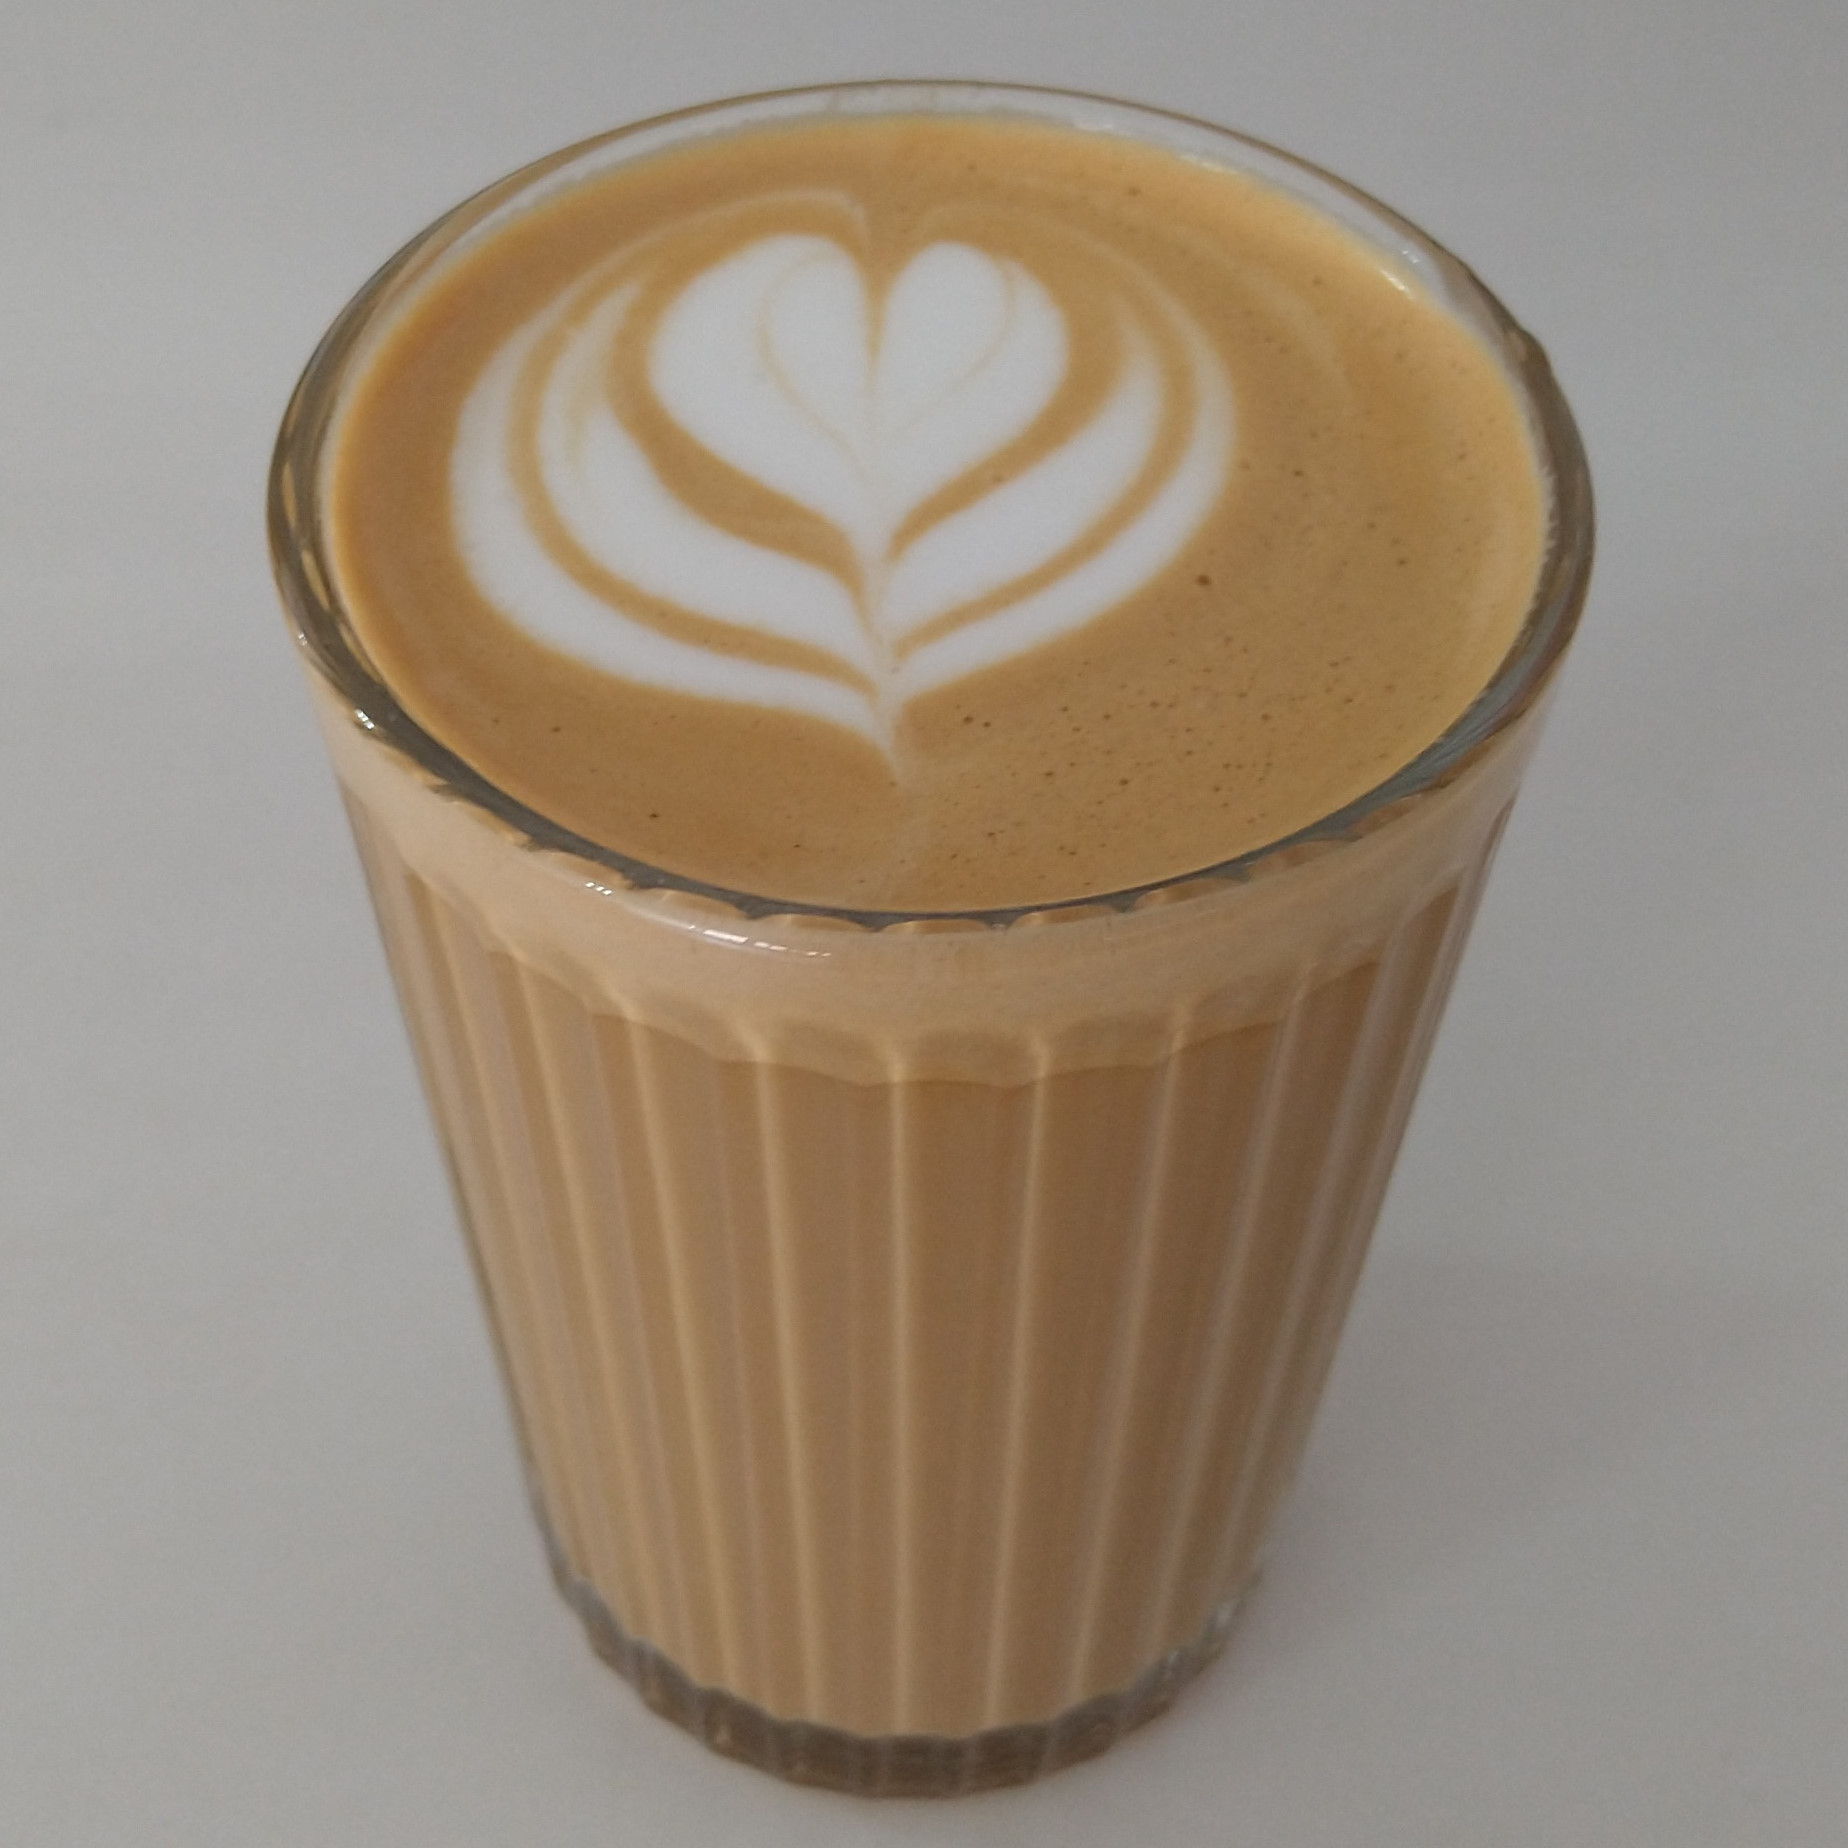 A lovely cortado, made with the Year One Anniverary Blend and served in a ribbed glass at Time & Tide Coffee.